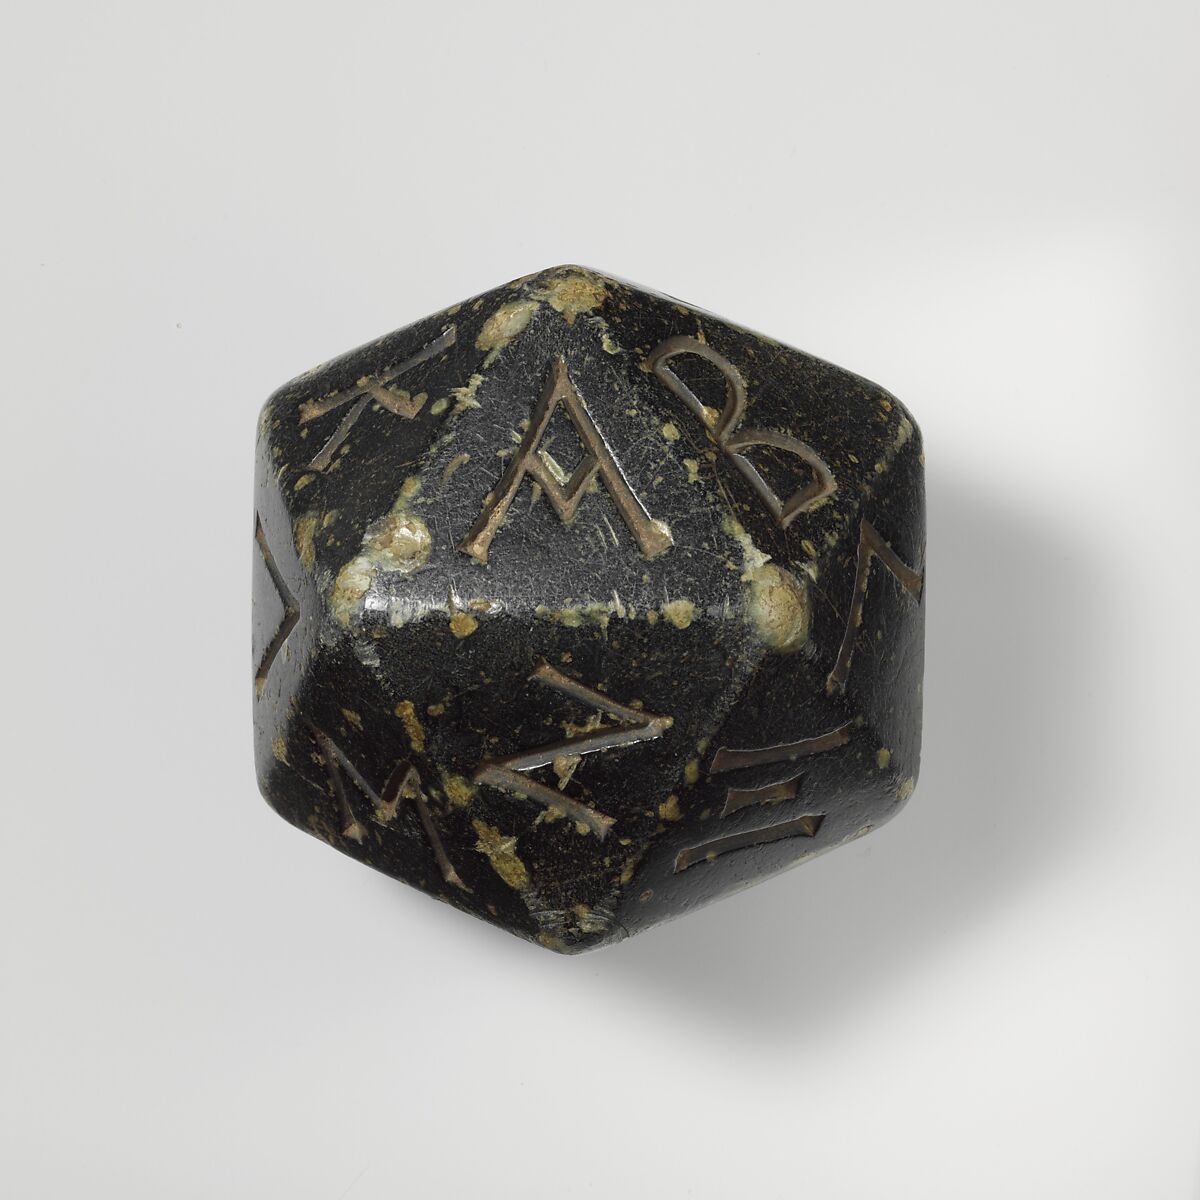 Greenstone polyhedron inscribed with letters of the Greek alphabet, Greenstone, Greek 